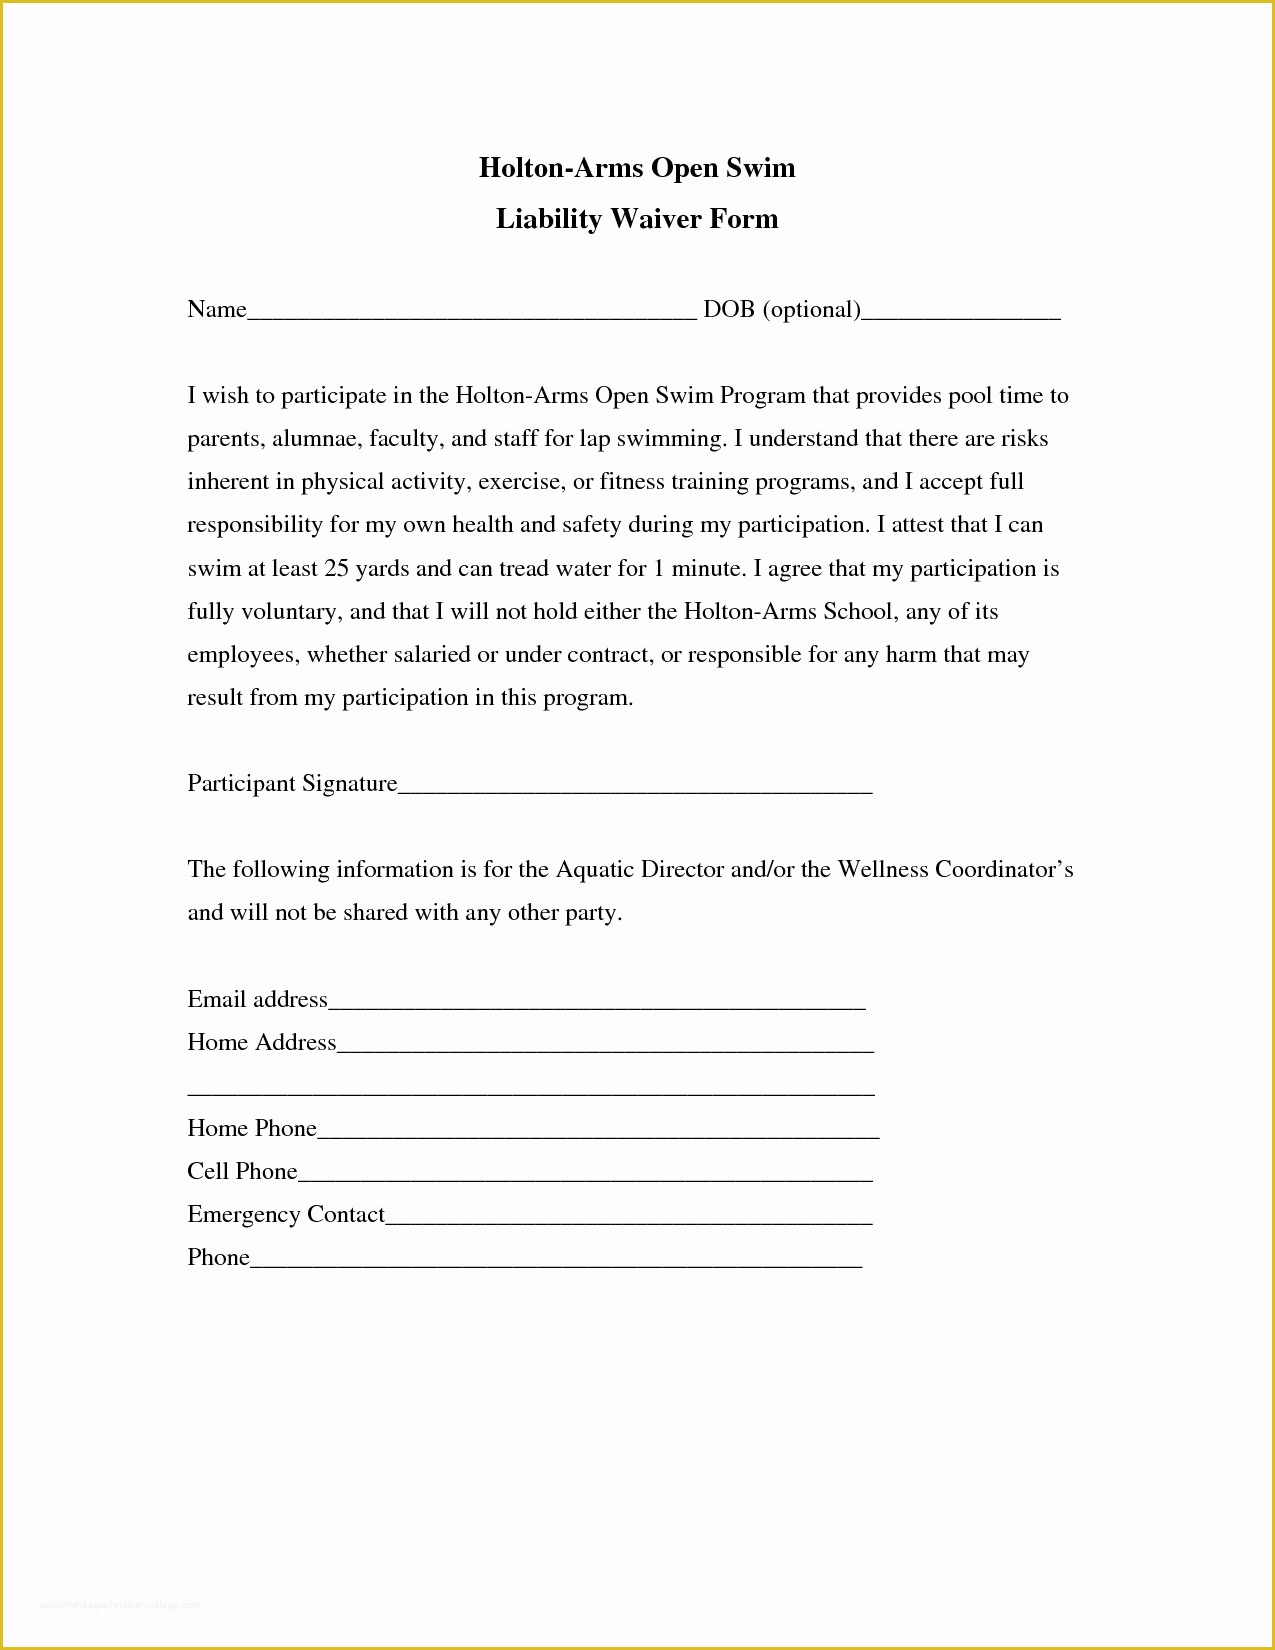 Free Liability Release form Template Of Liability Insurance Liability Insurance Waiver Template